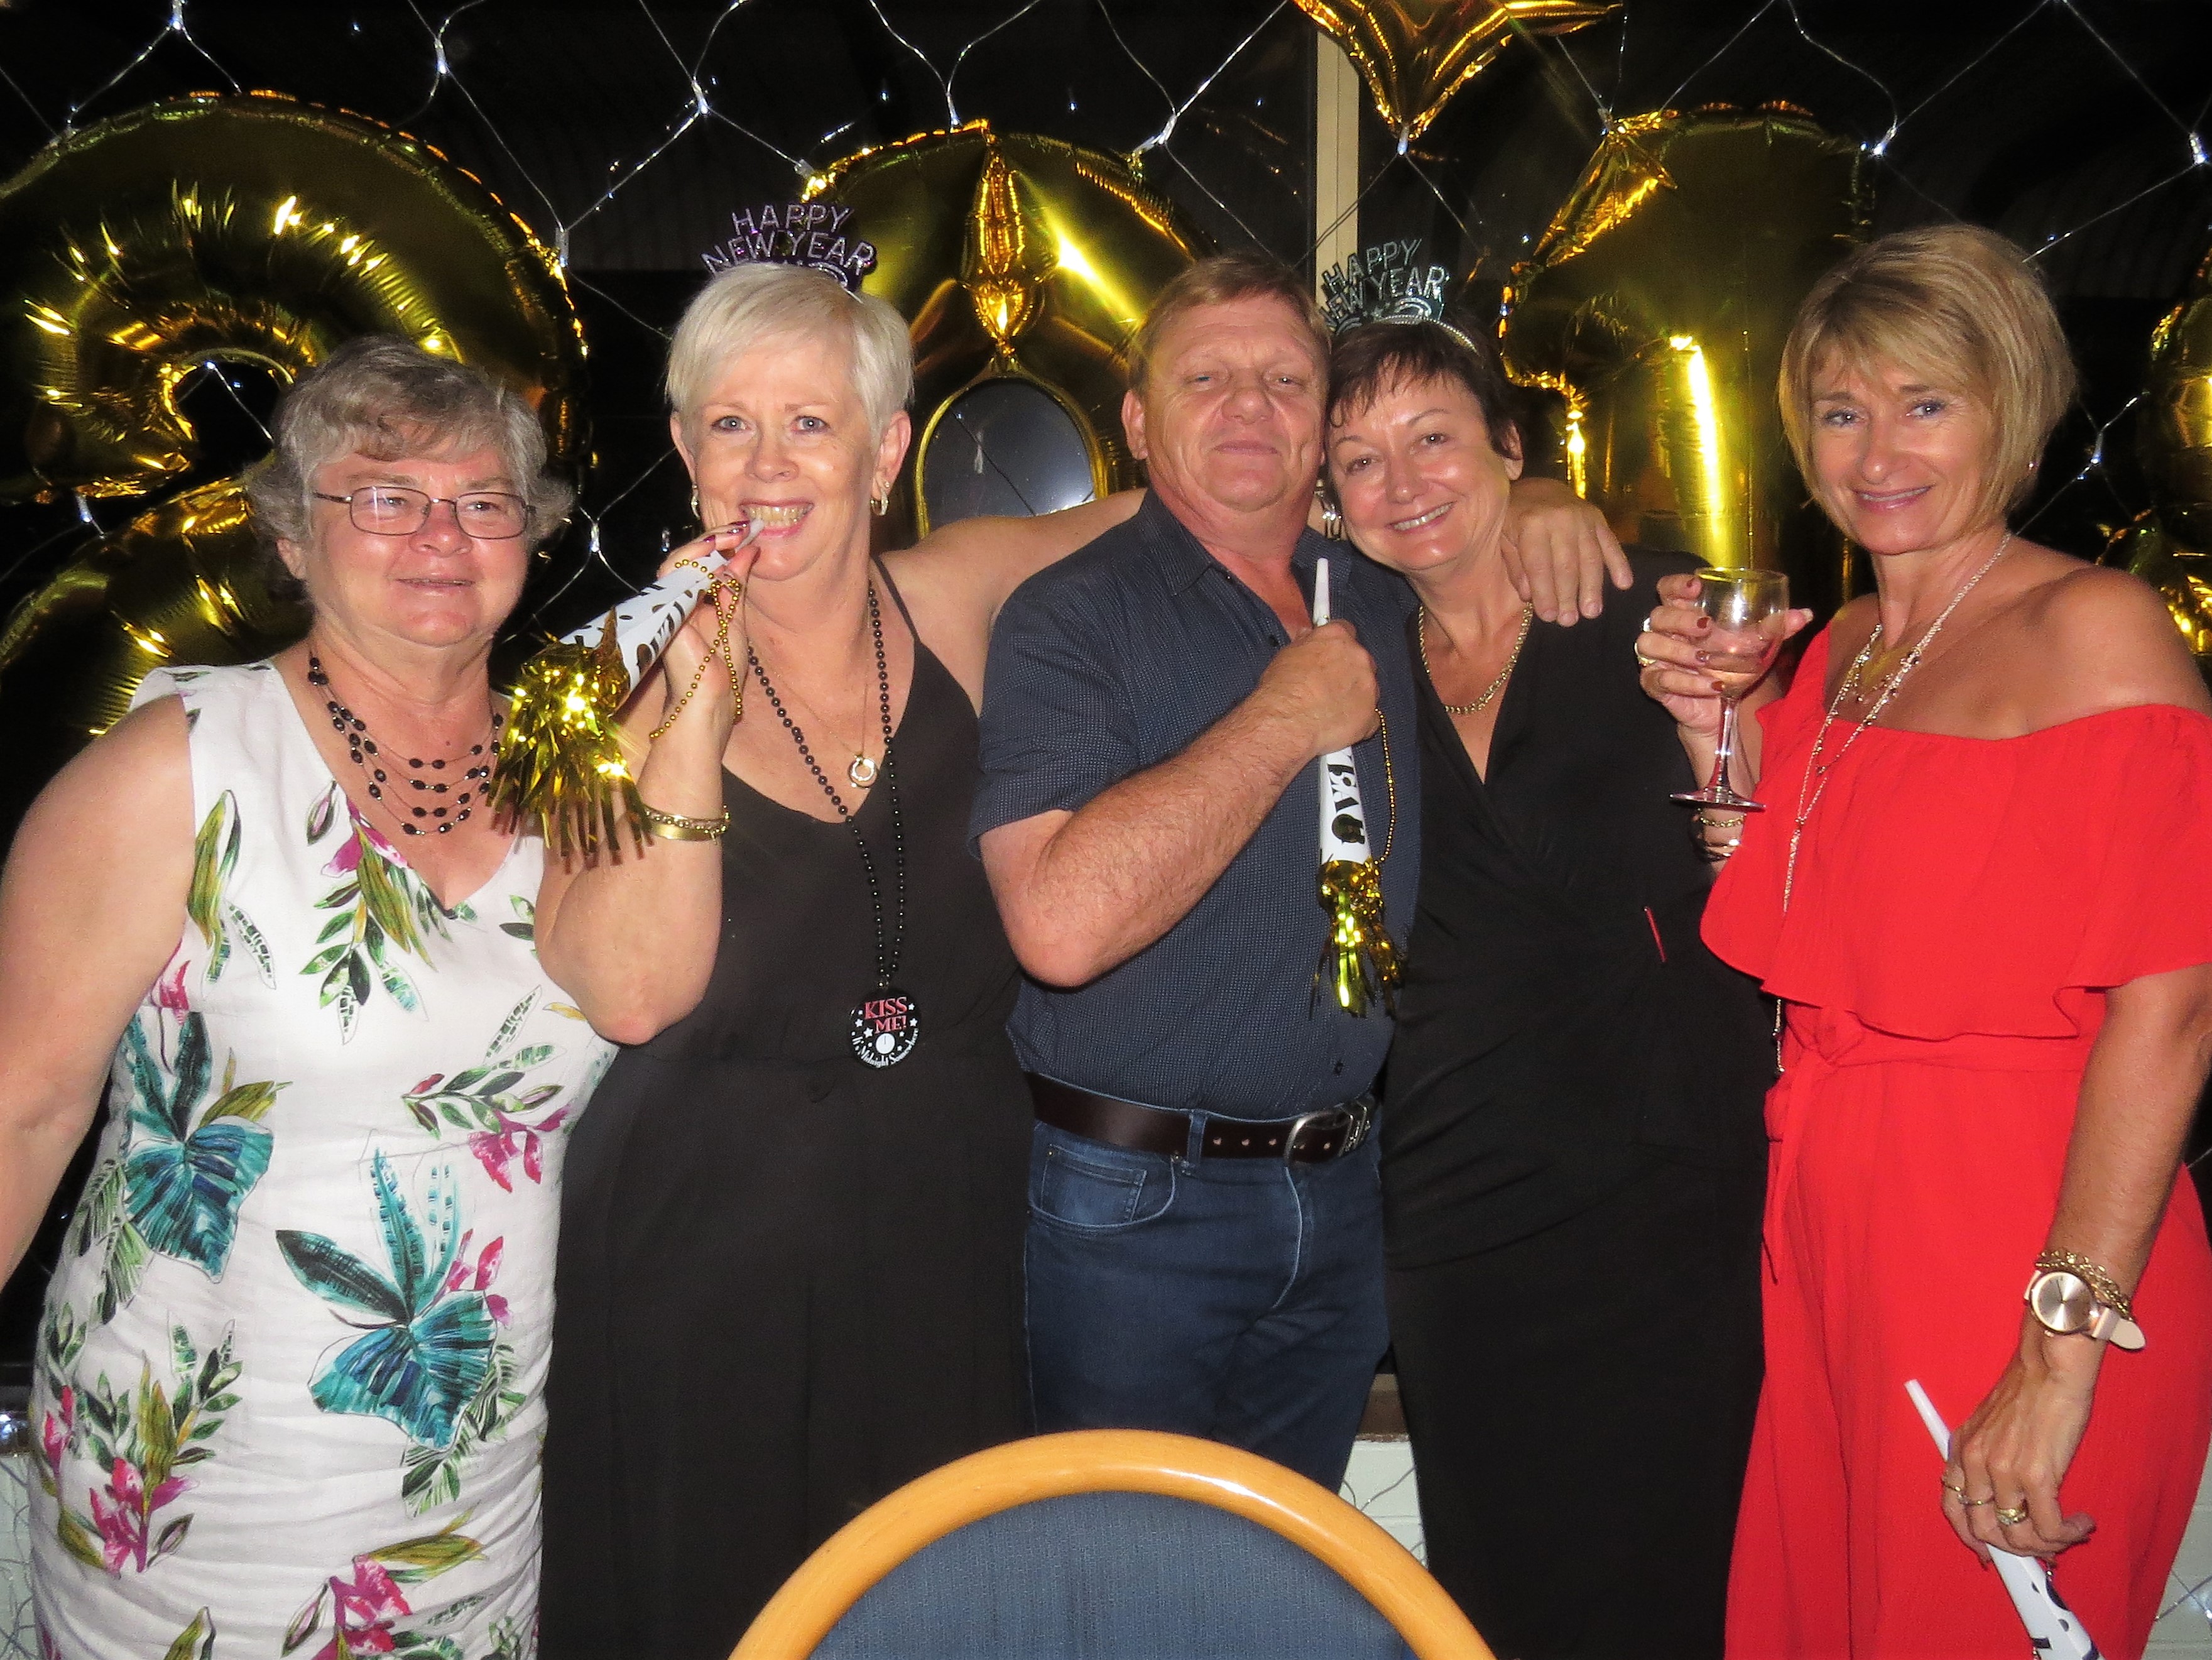 Maxine Gooch, Karen Barry, Alan Robards, Julie Pryer and Lexie Gregory celebrate in style. 